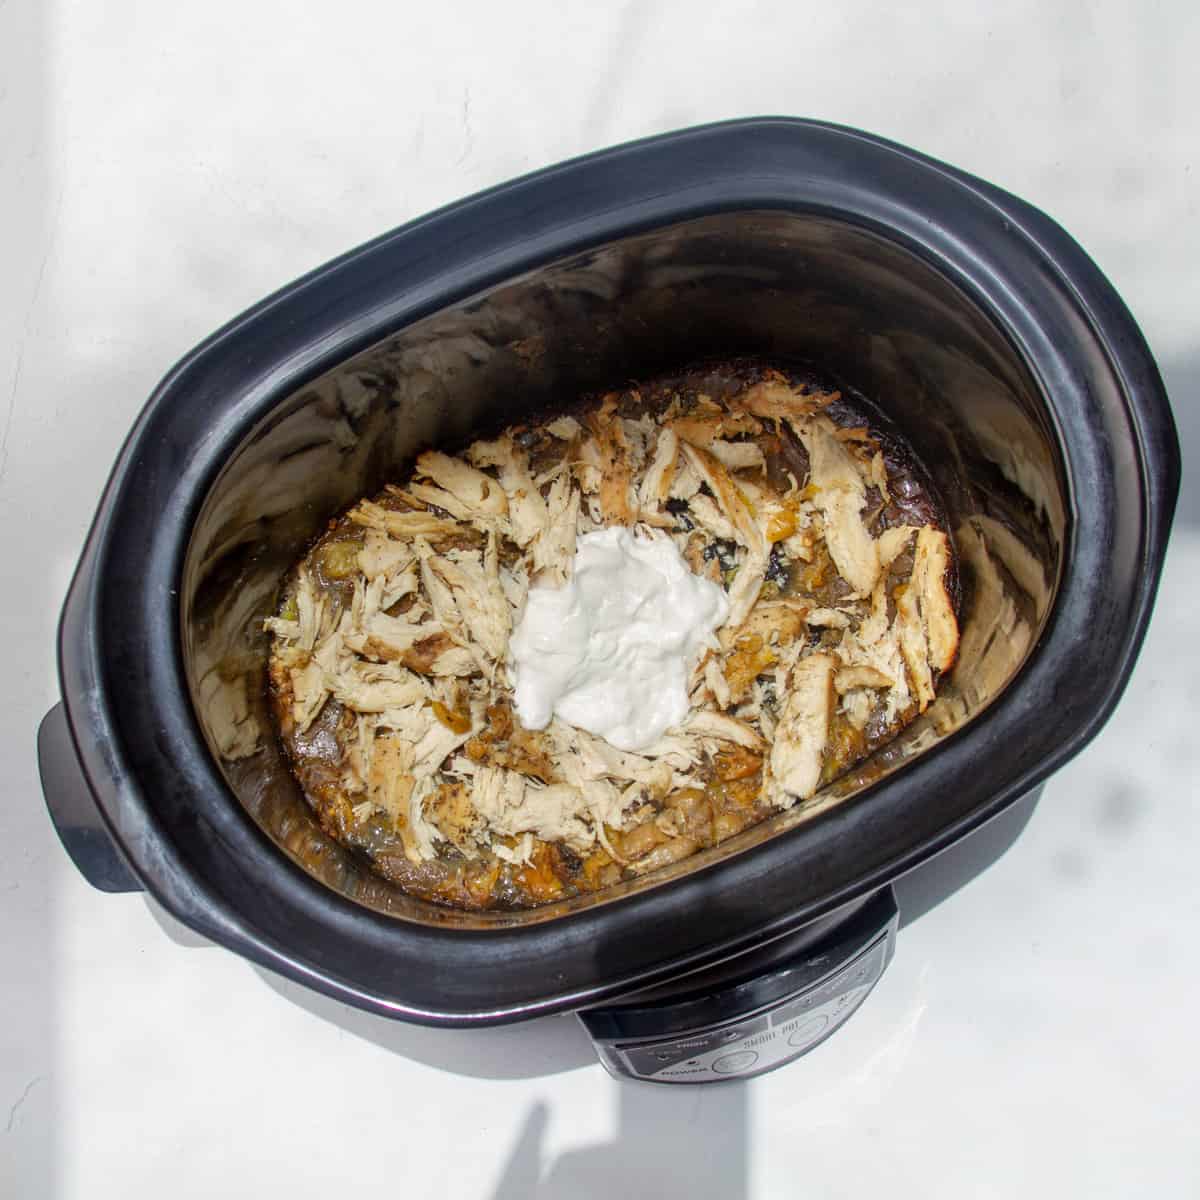 Cooked and shredded Mississippi chicken in a slow cooker.